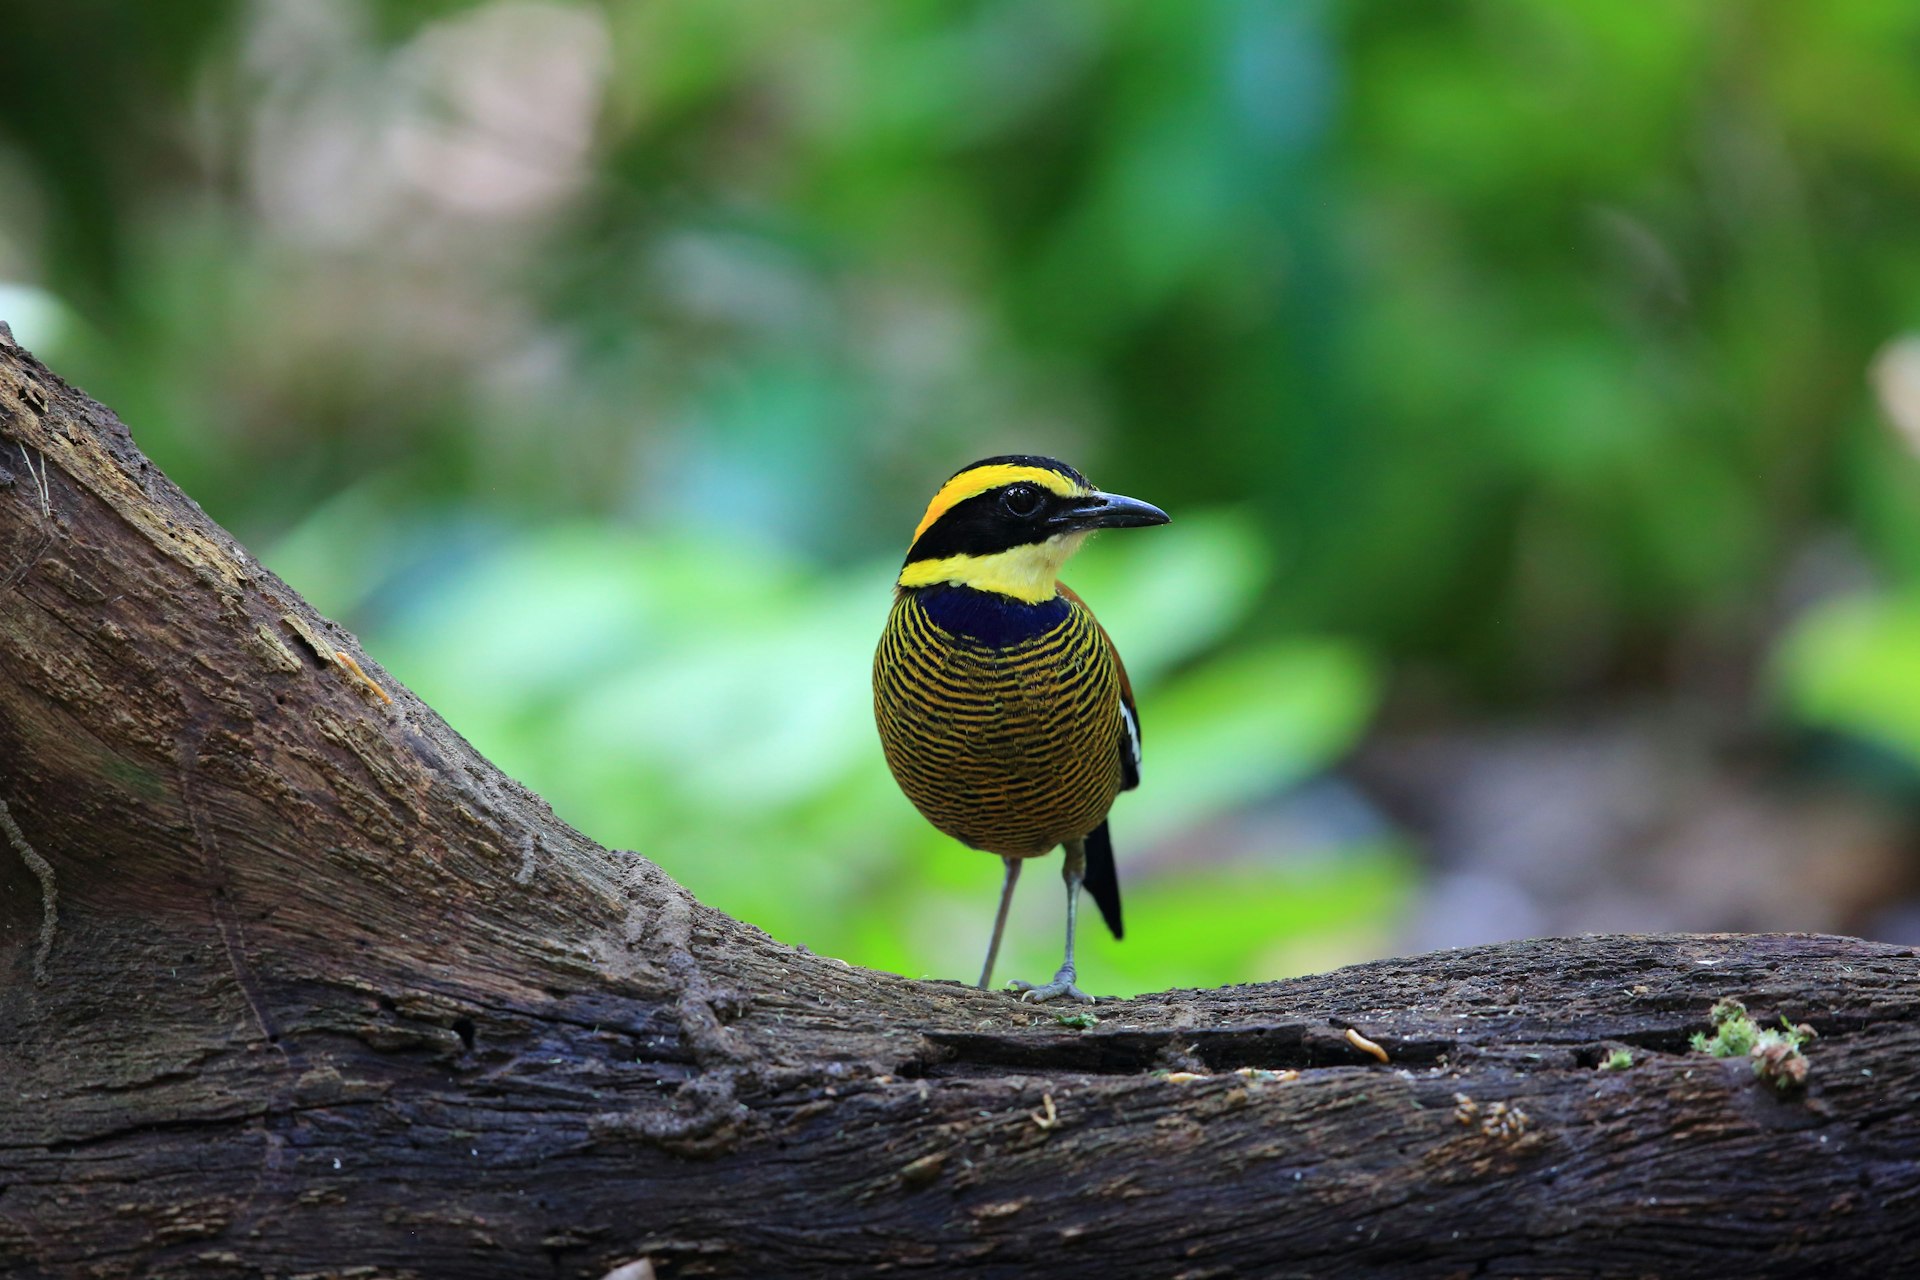 Javan Banded Pitta (Pitta guajana) standing on a branch in West Bali National Park.